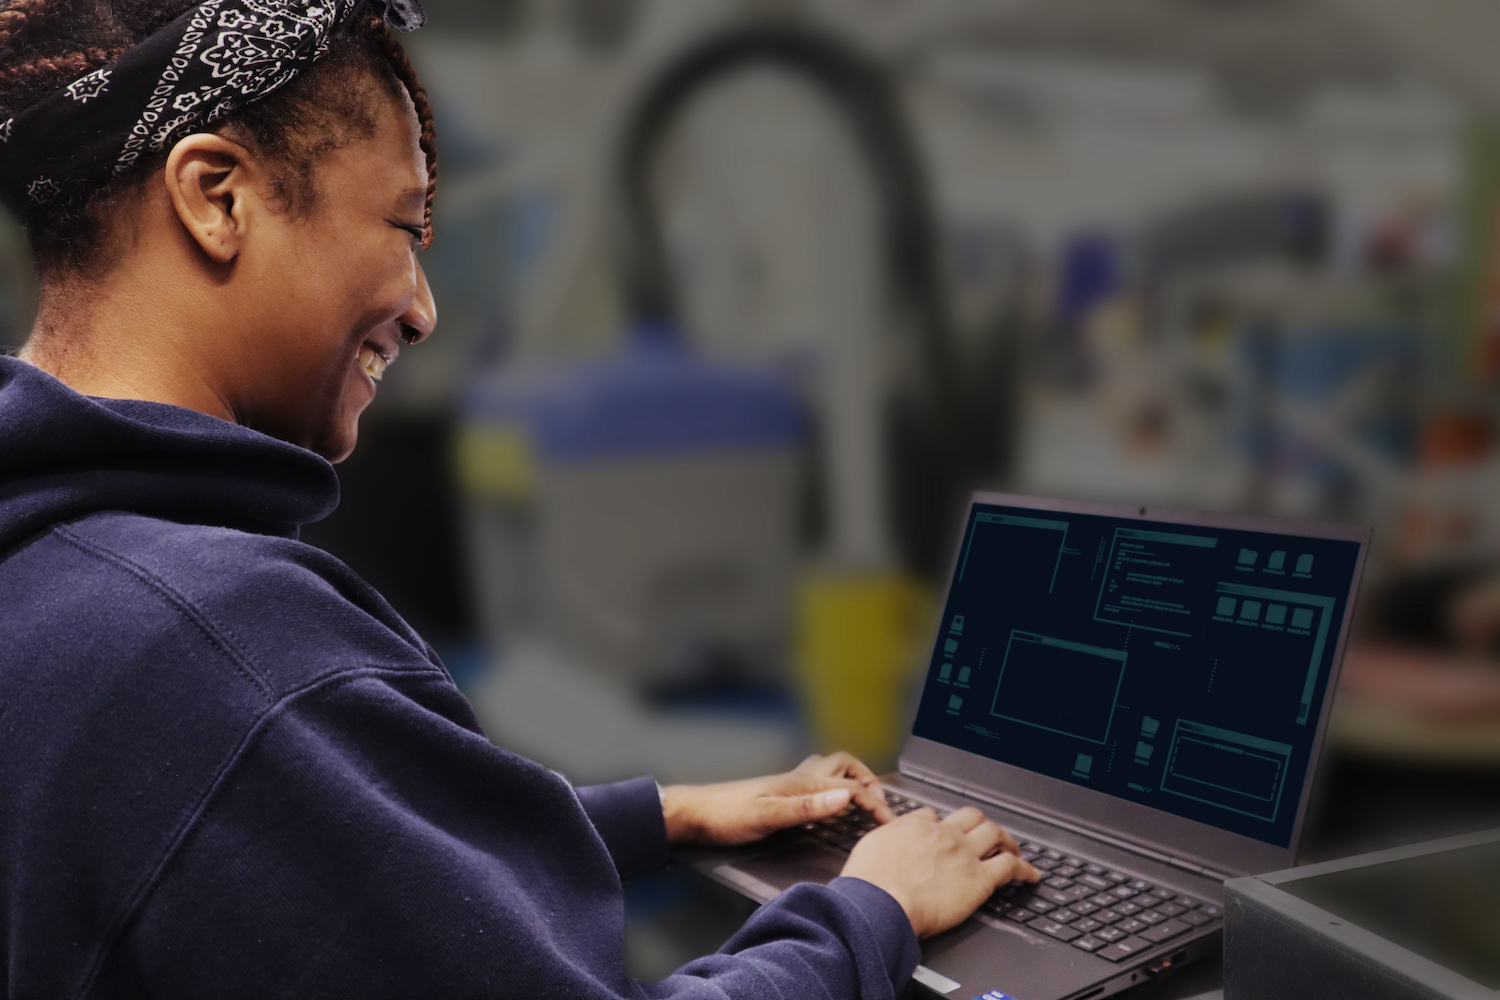 The side profile of a Blue Origin employee wearing a hoodie shows them smiling at a laptop screen with their hands on the keyboard.